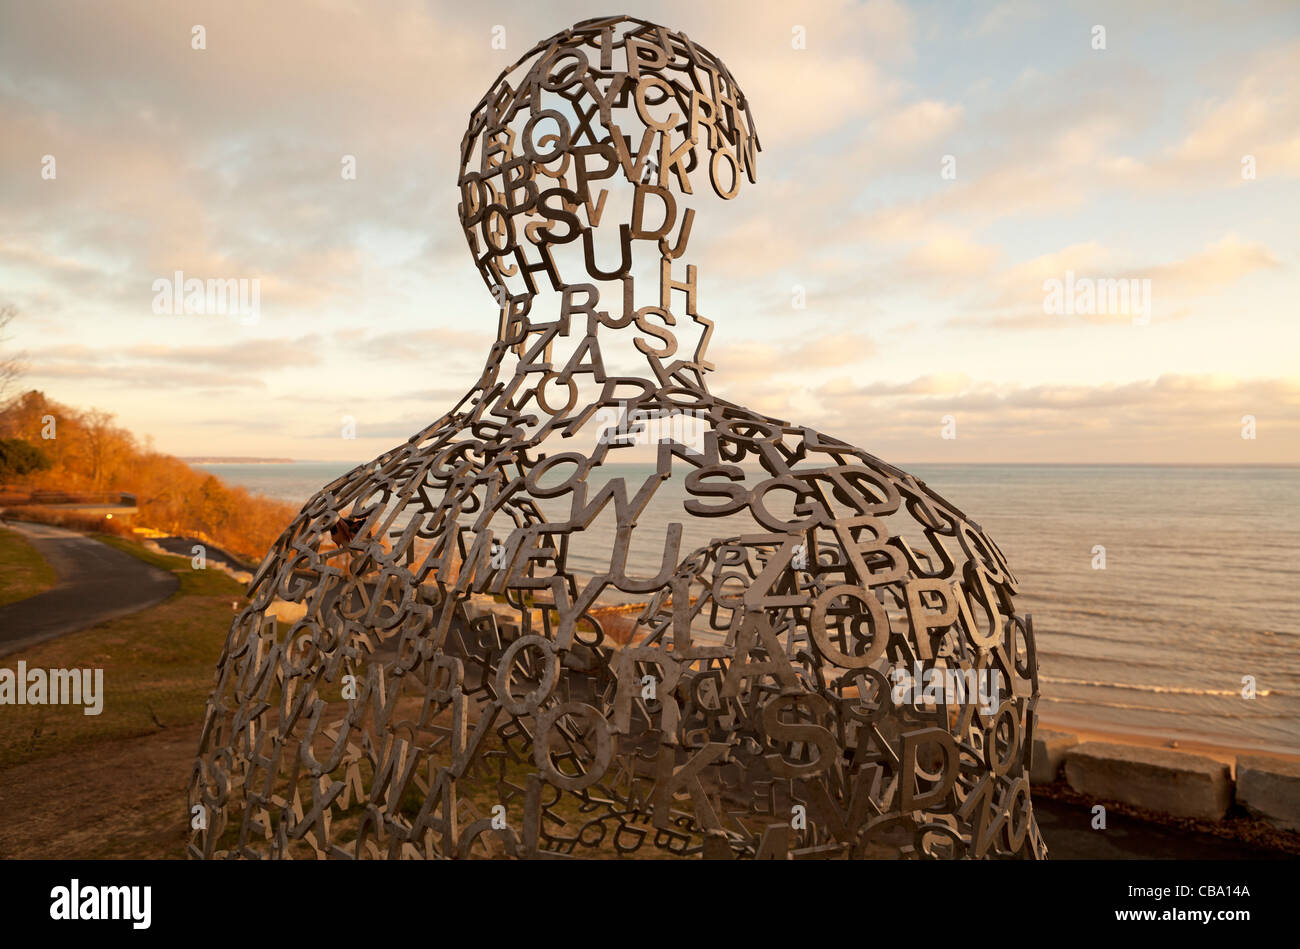 Spillover ll by Jaume Plensa sits on a bluff overlooking Lake Michigan in Shorewood, Wisconsin. Stock Photo